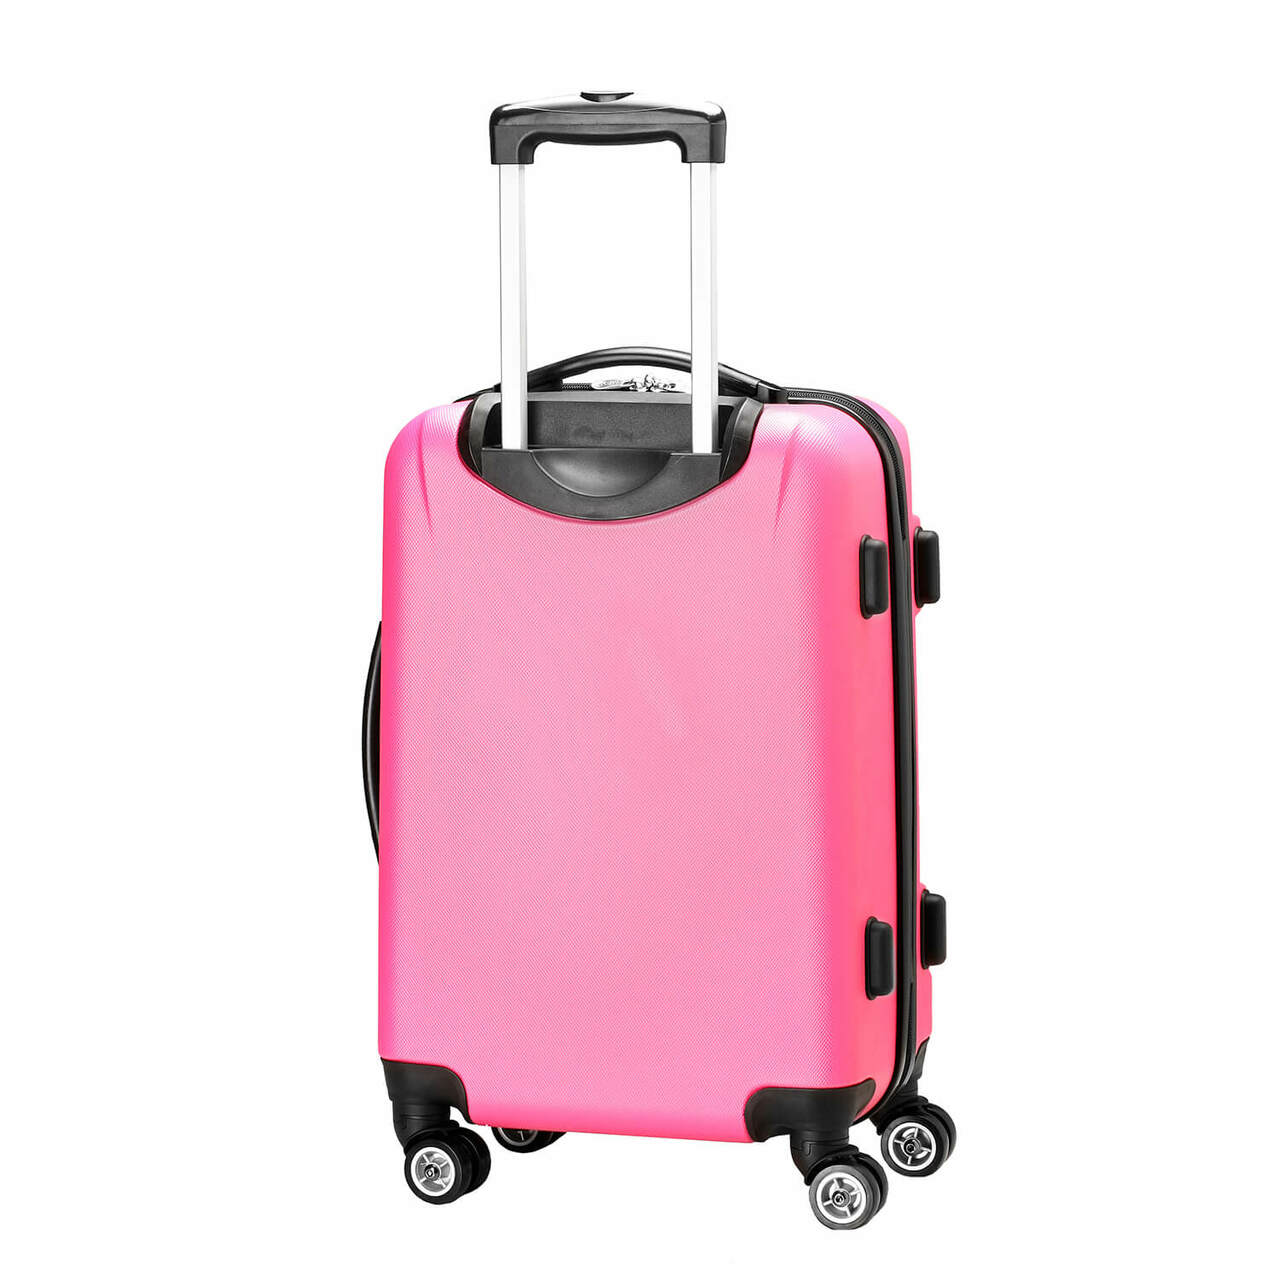 Kentucky Wildcats 20" Pink Domestic Carry-on Spinner